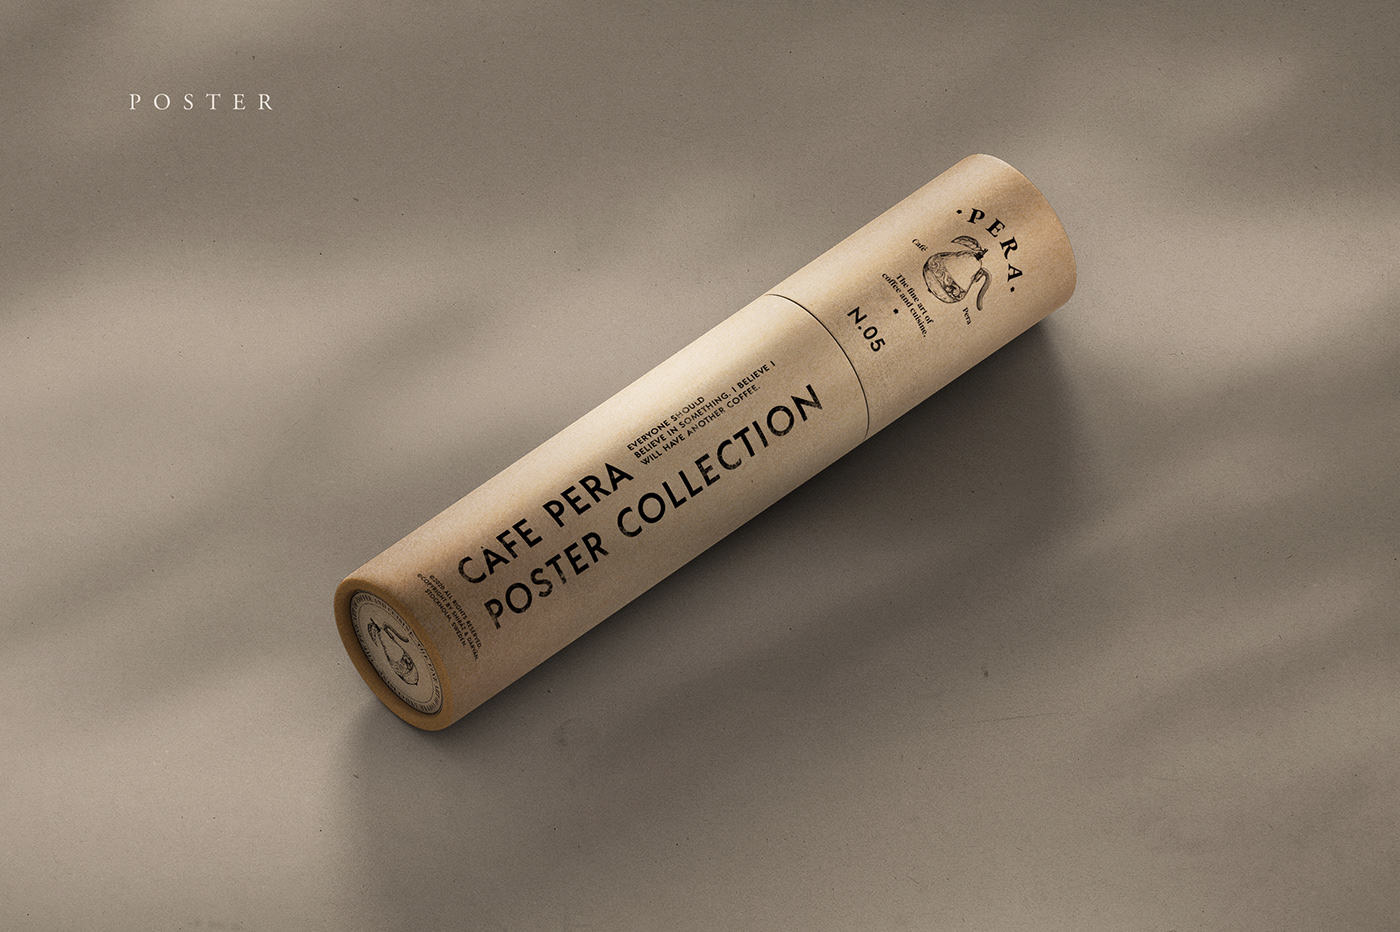 poster
poster design
paper tube
packaging
poster collection
cafe poster
brand identity
craft
pipe
